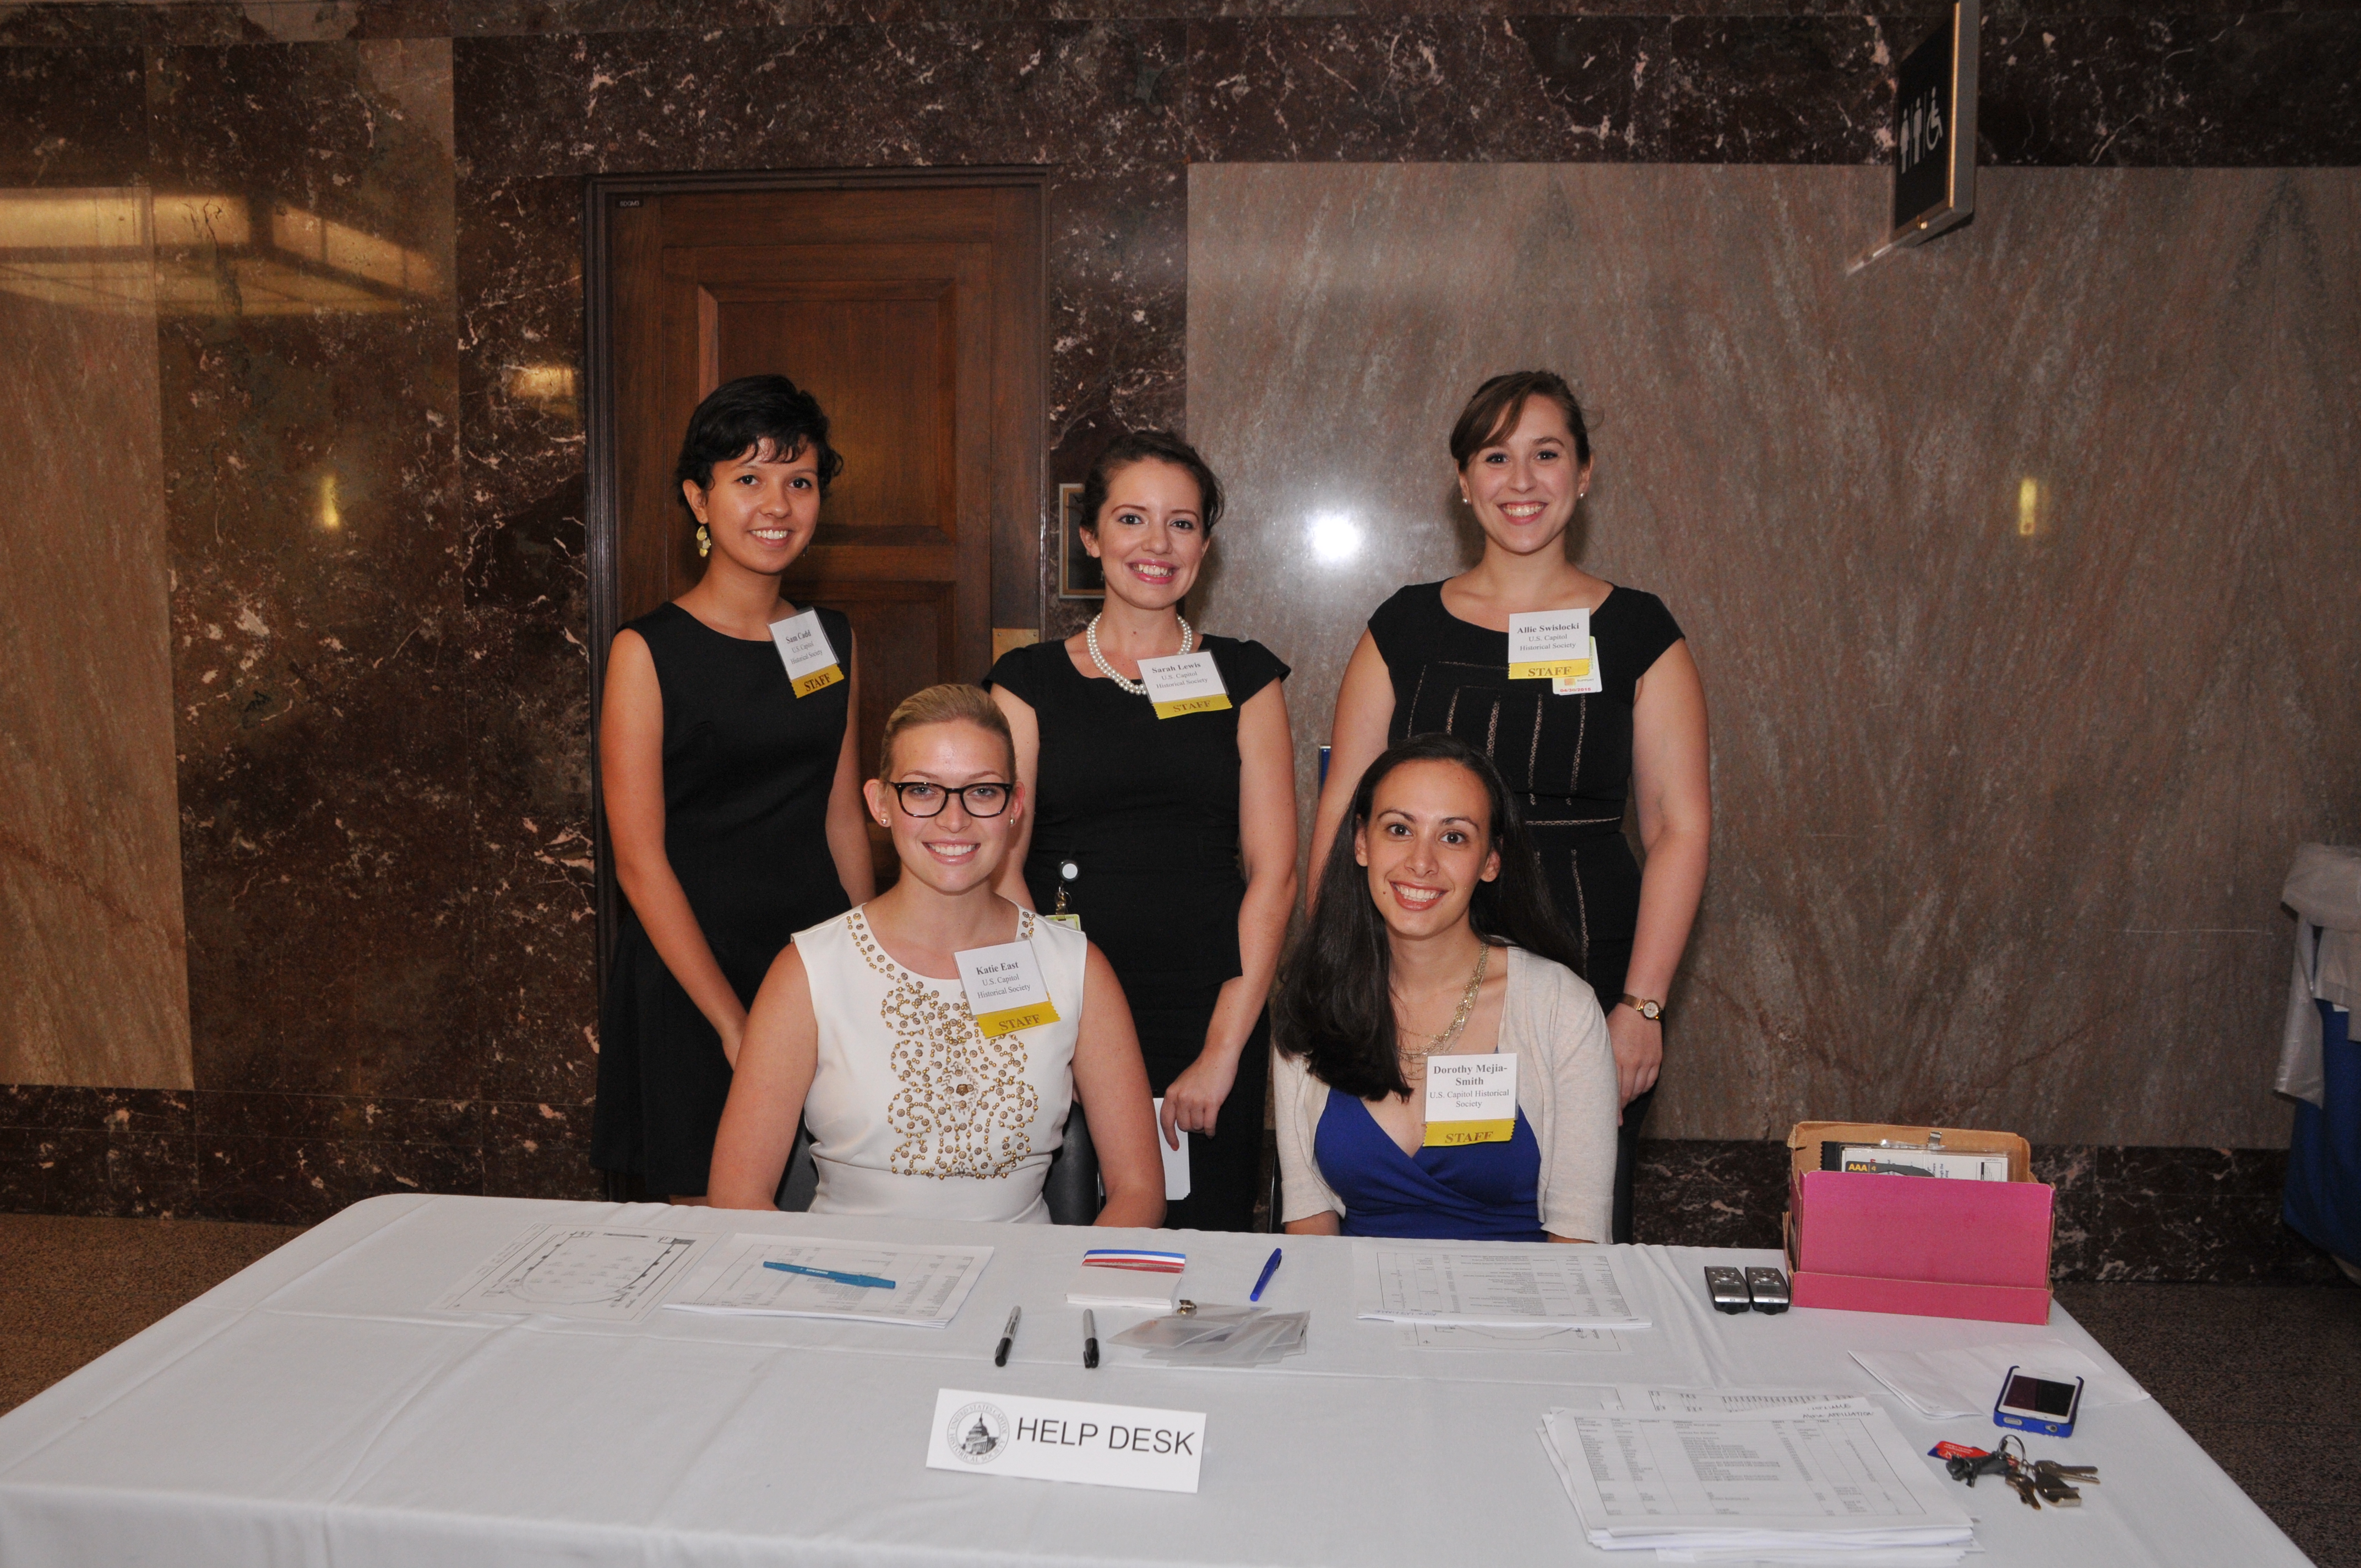 Society intern Katie East and Dorothy Mejia-Smith (Director, Membership Programs) ready to help people check in, while Sam Cadd (intern), Sarah Lewis (Development Coordinator and Tours Manager), and Allie Swislocki (Manager, Development and Outreach) stand by to help.